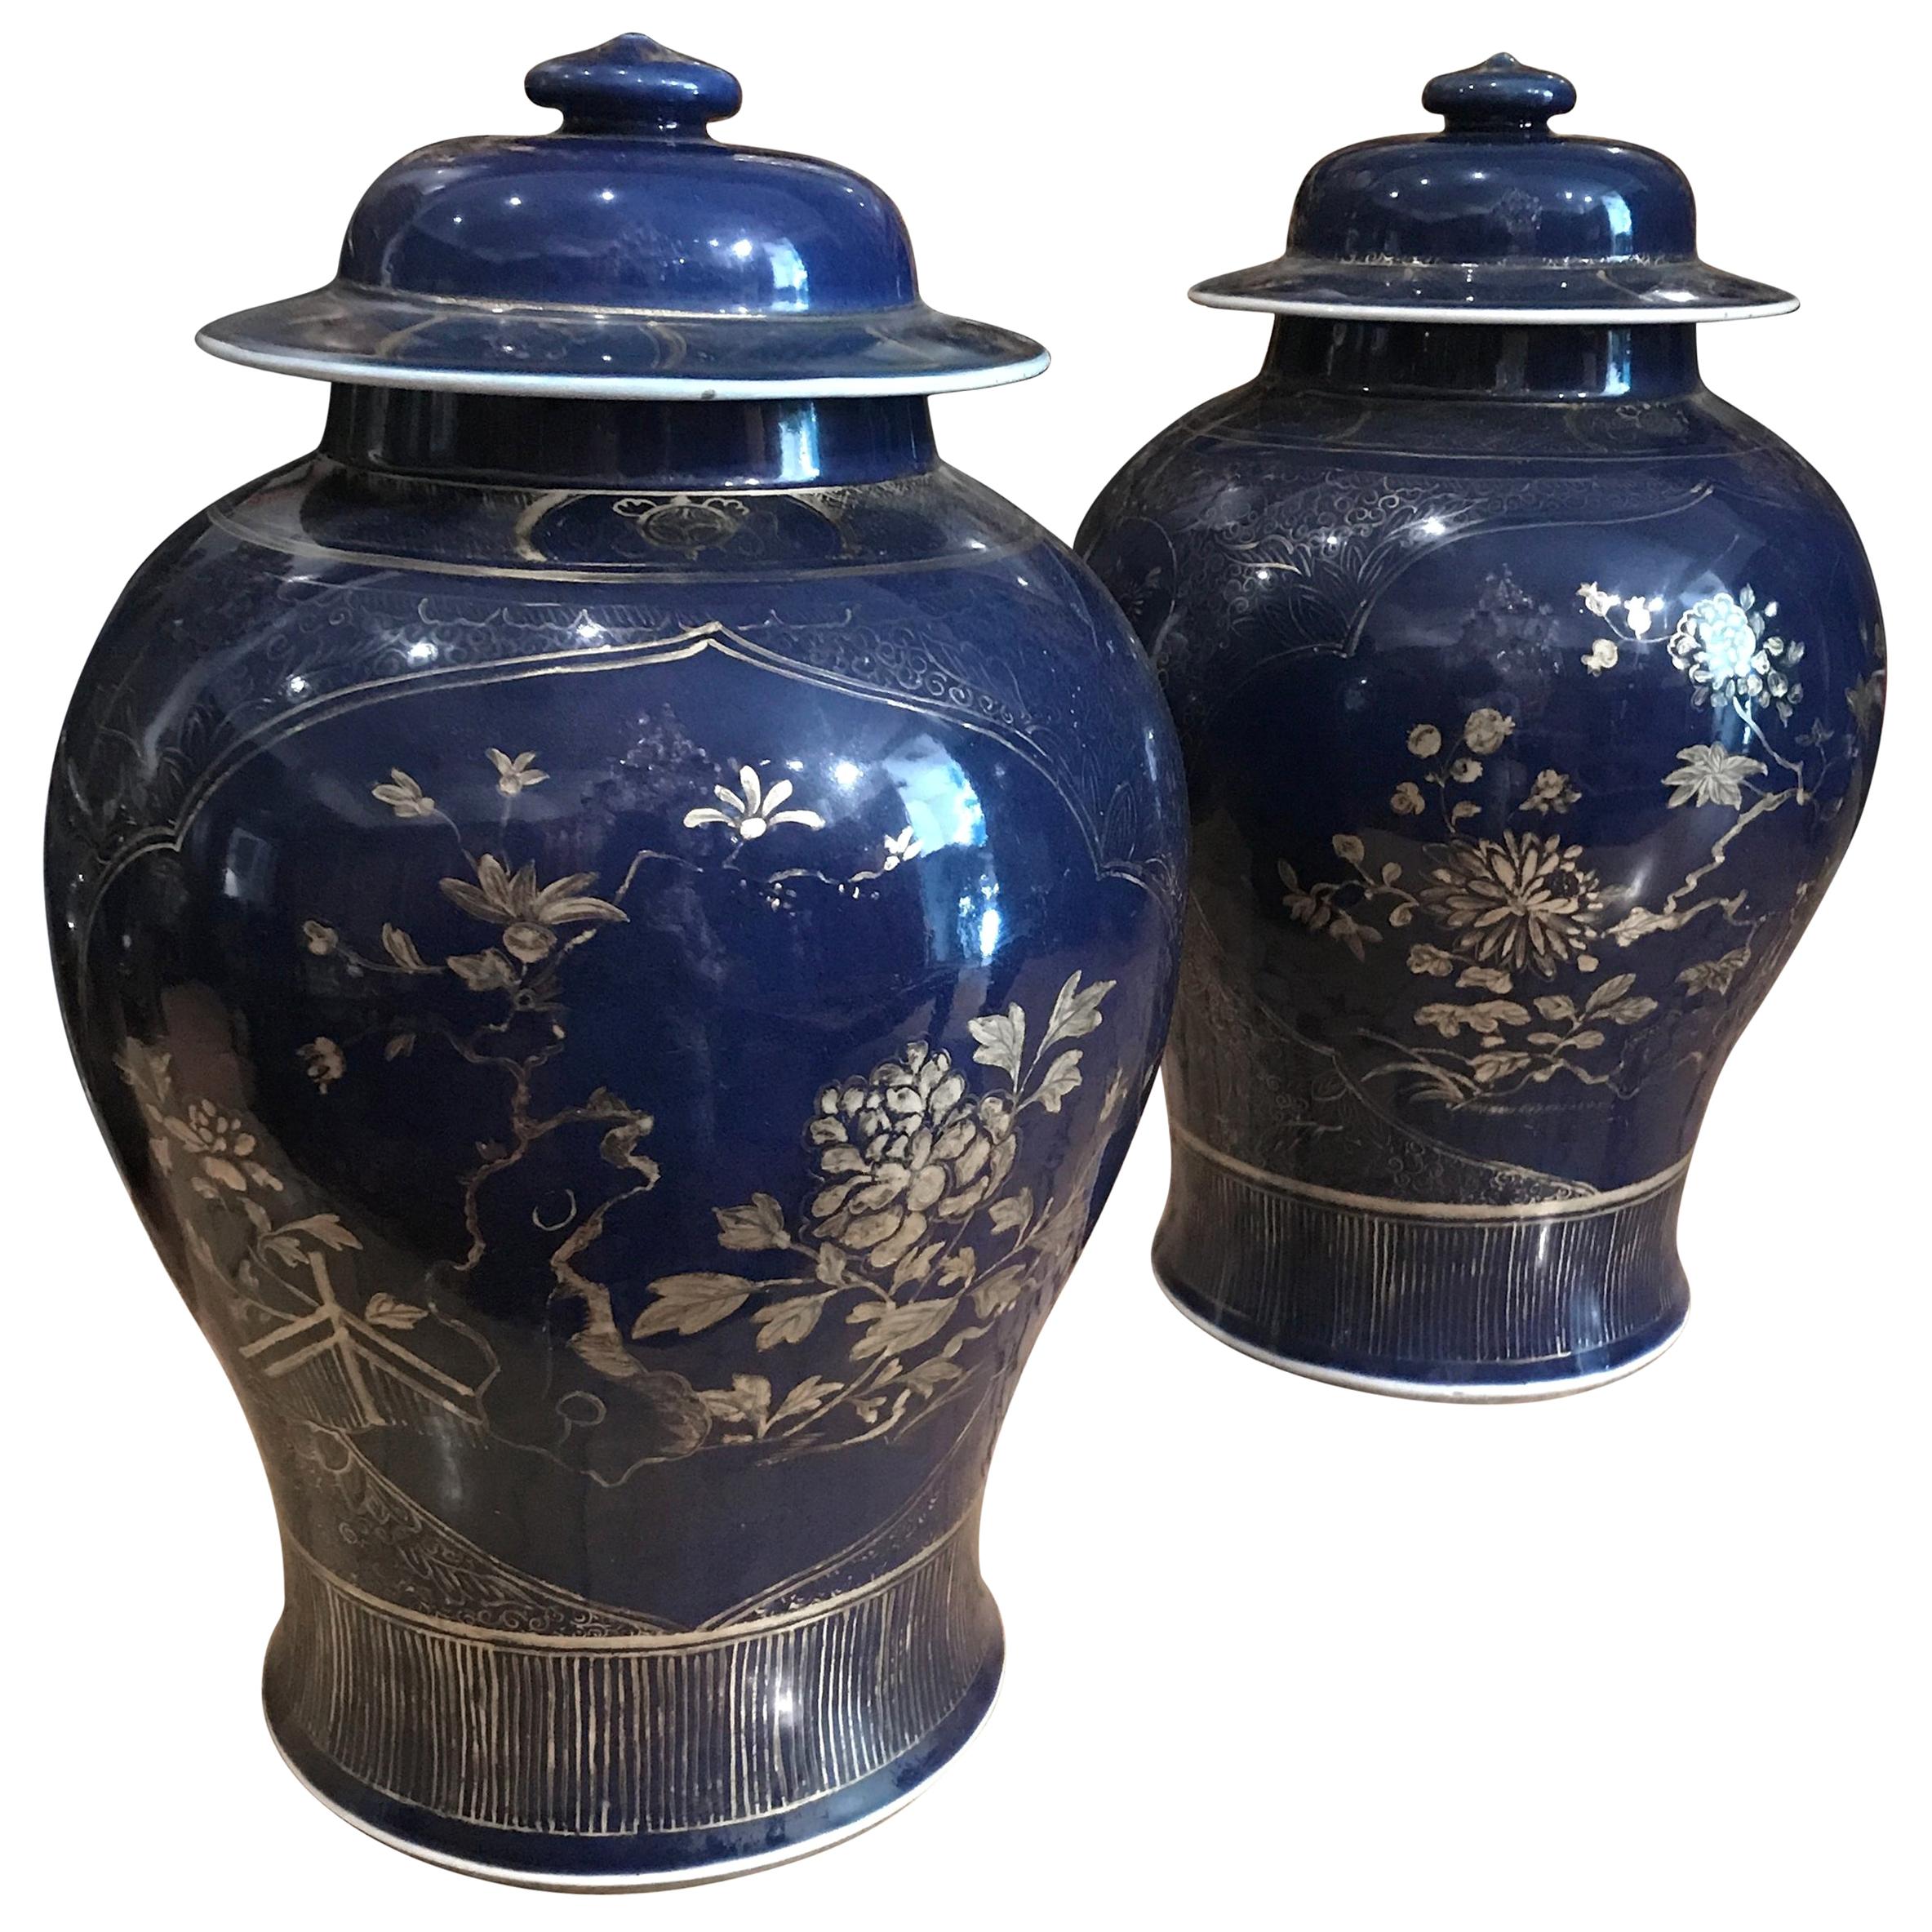 Pair of Chinese Powder-Blue Gilt-Decorated Jars, 18th Century For Sale